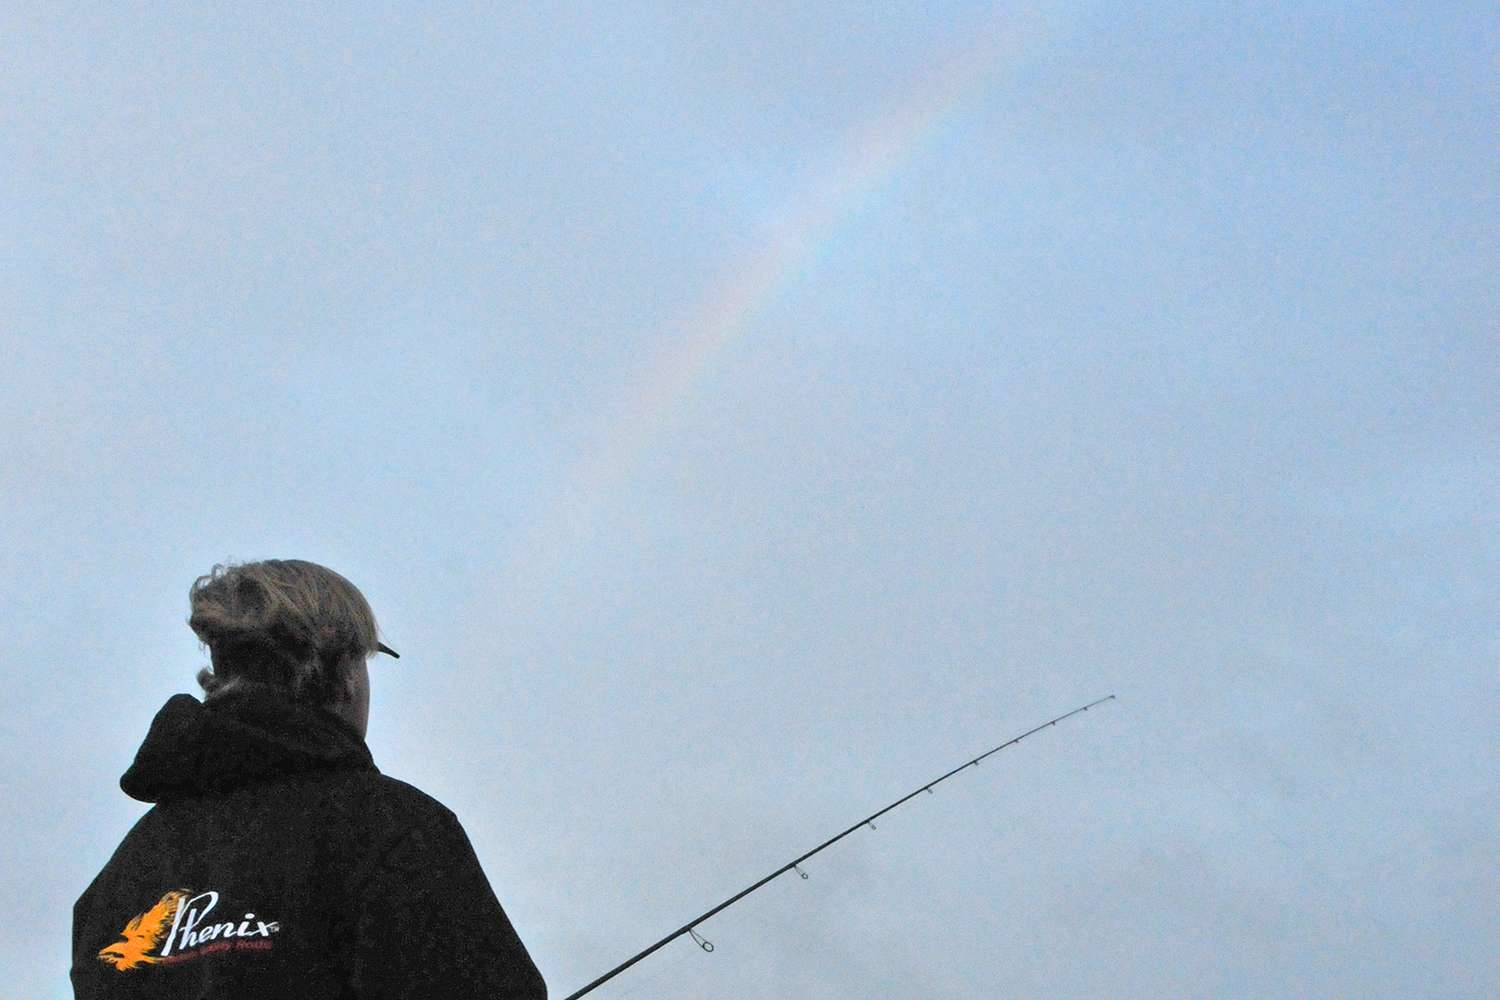 A rainbow marks a pot of bronze for Pirch, who said he wished he could get a bend in his rod to match the arch of the rainbow.